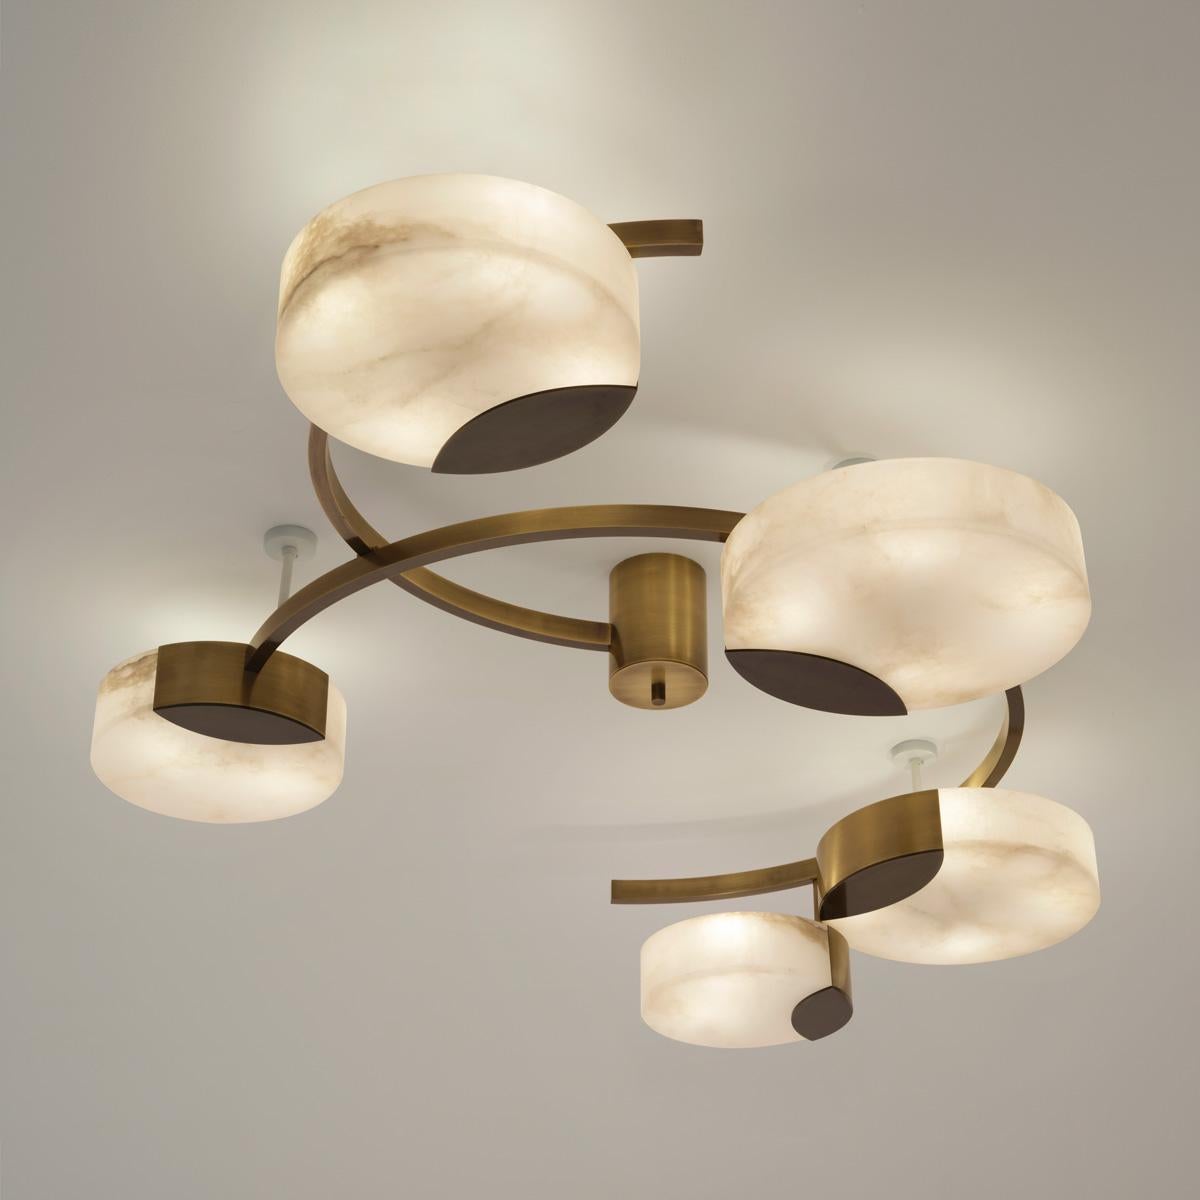 Cloud N.5 Ceiling Light by Gaspare Asaro-Satin Brass Finish In New Condition For Sale In New York, NY